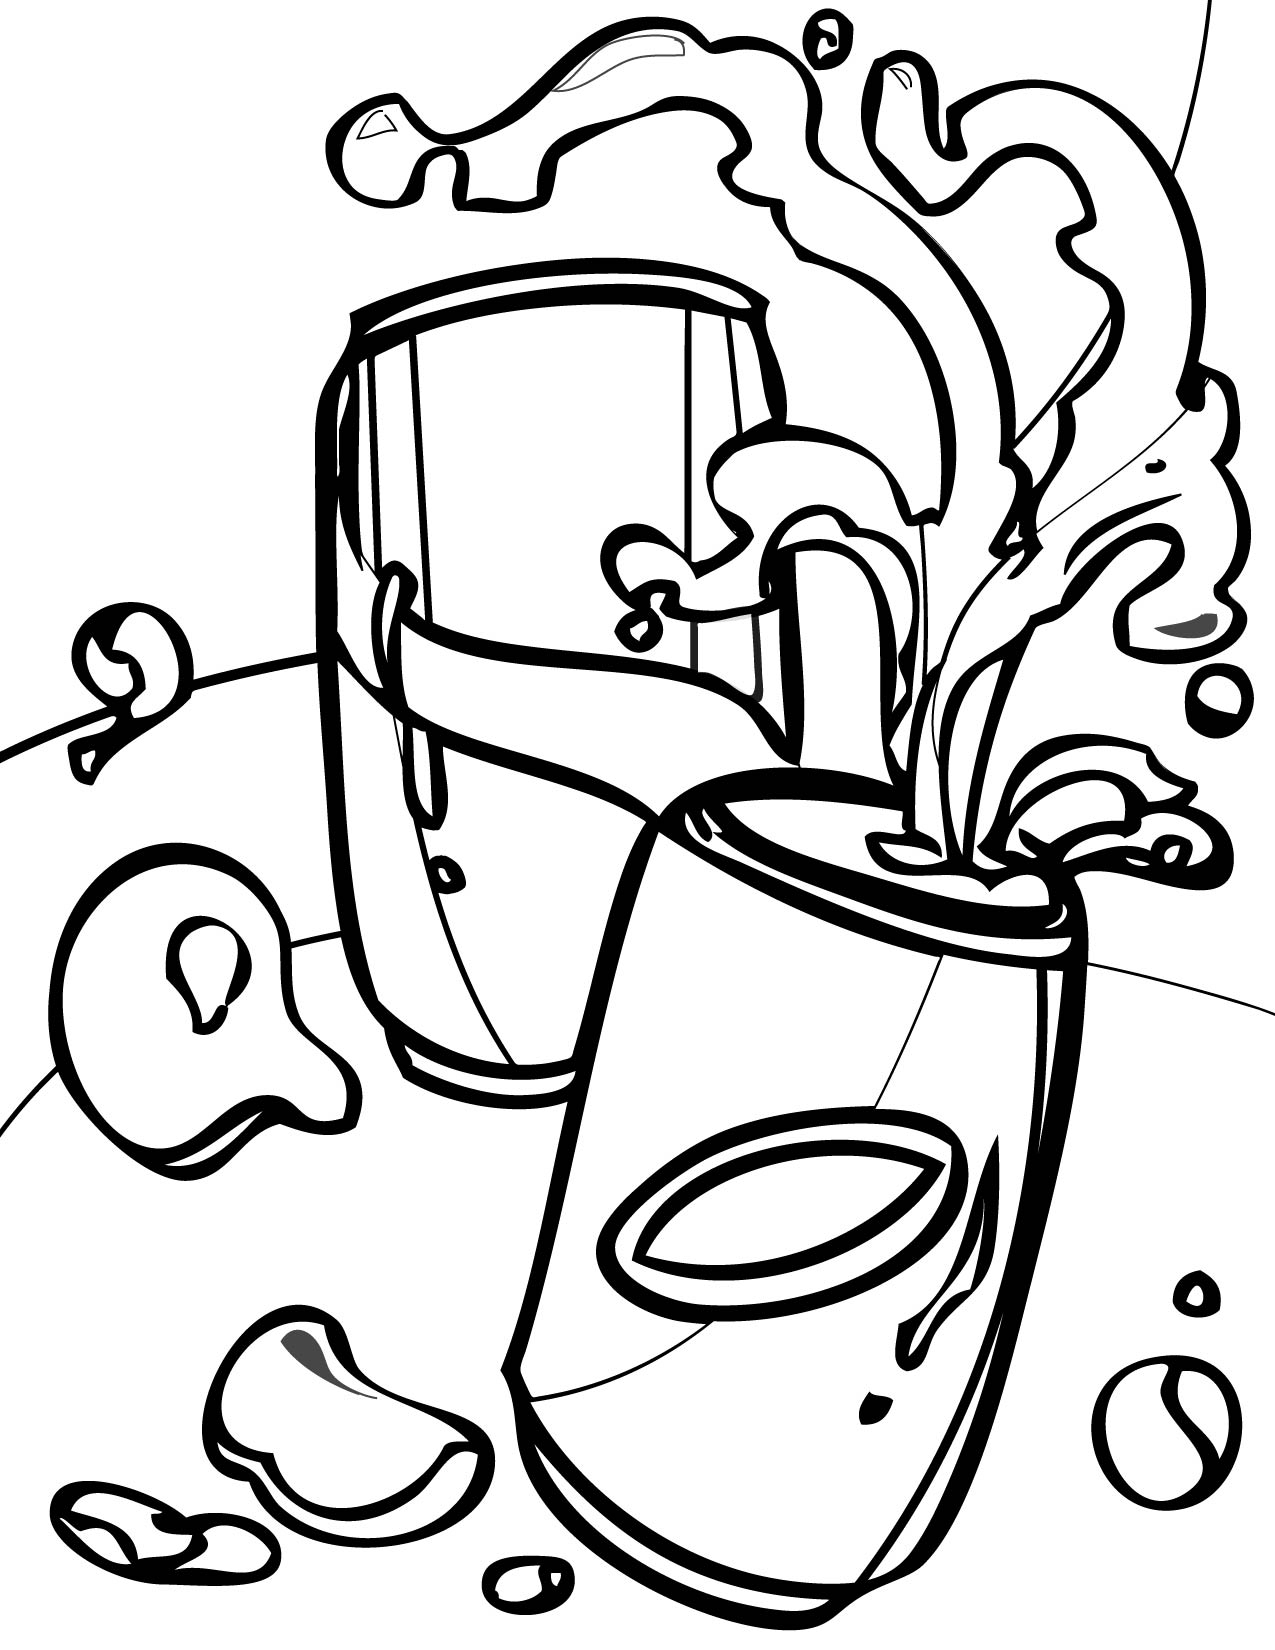 Soda Can Coloring Page at GetDrawings | Free download